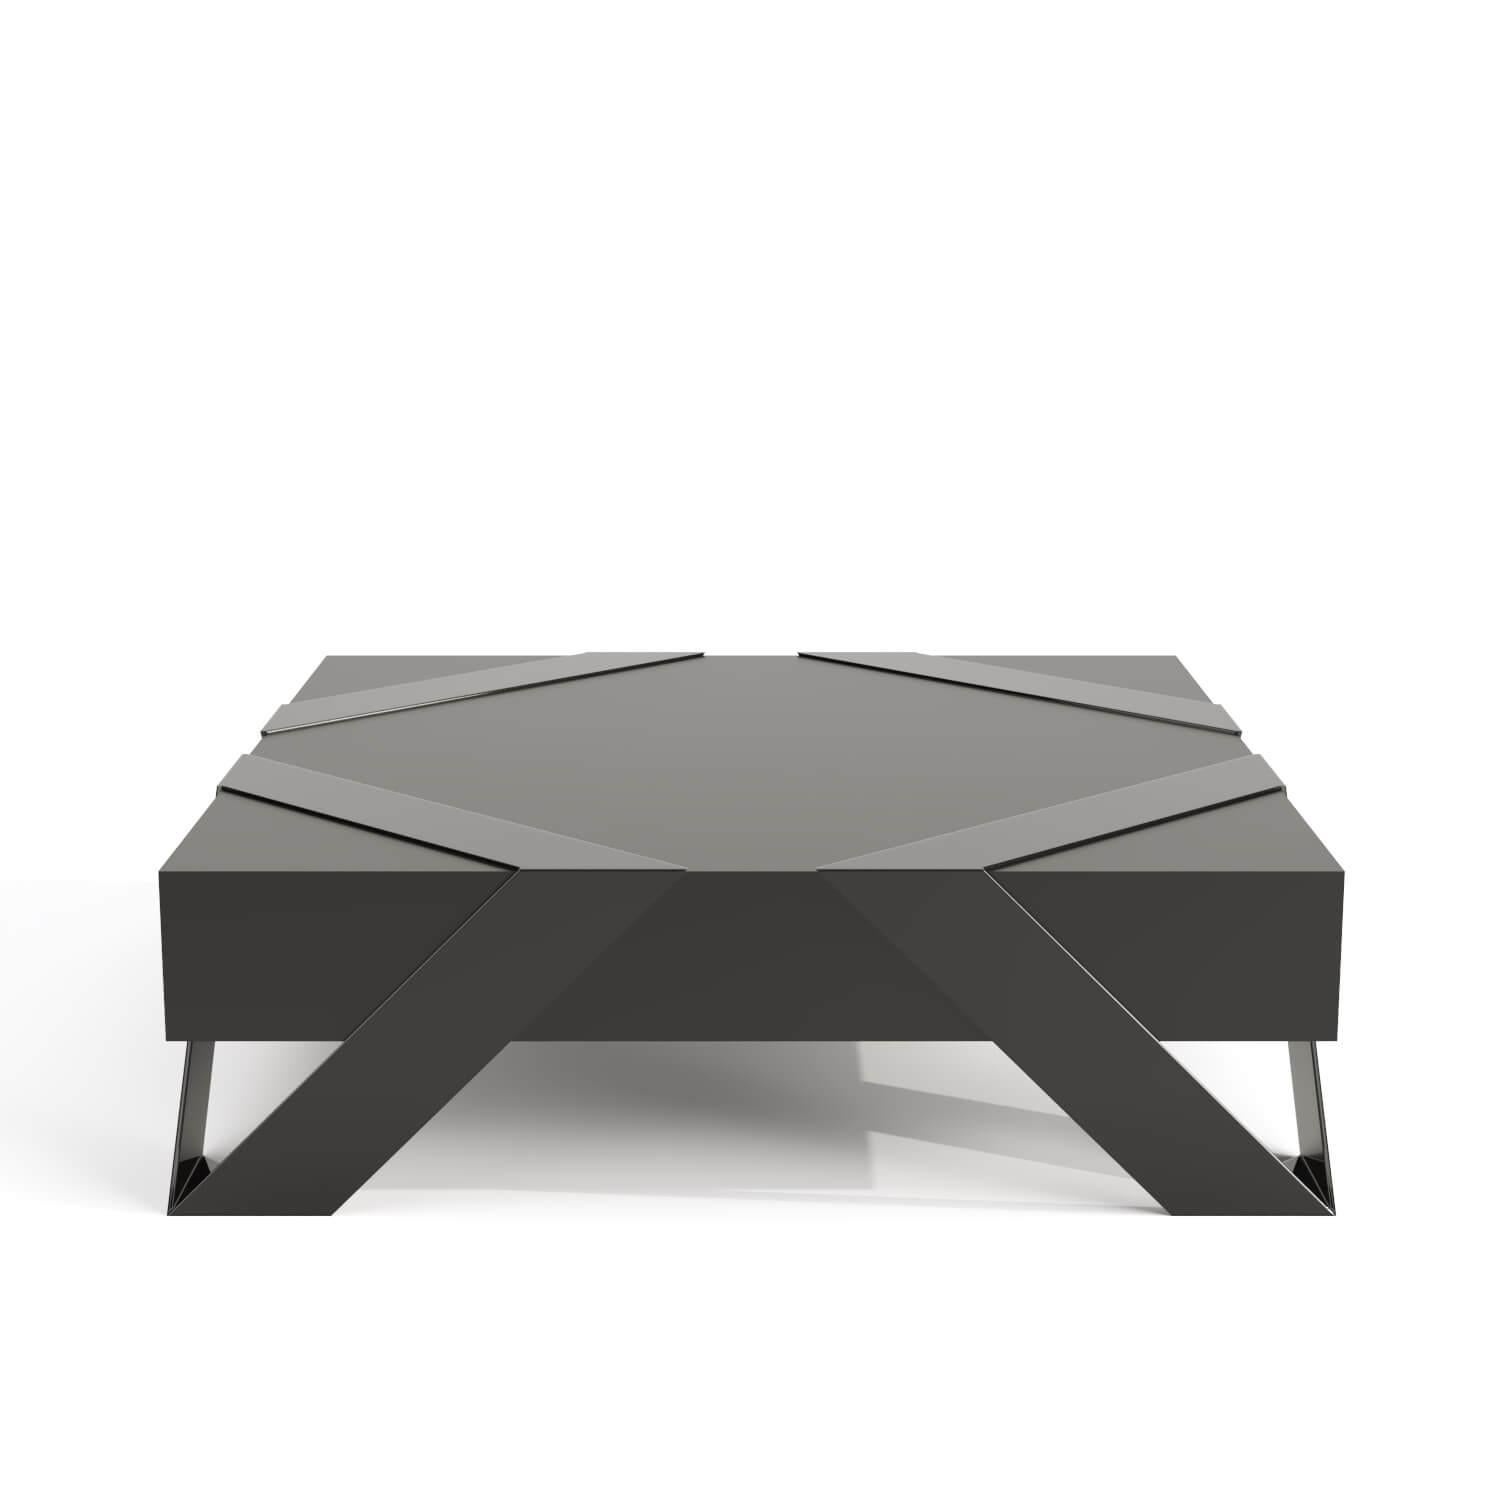 Metal Modern Minimalist Square Center Coffee Table Walnut Wood Brushed Stainless Steel For Sale